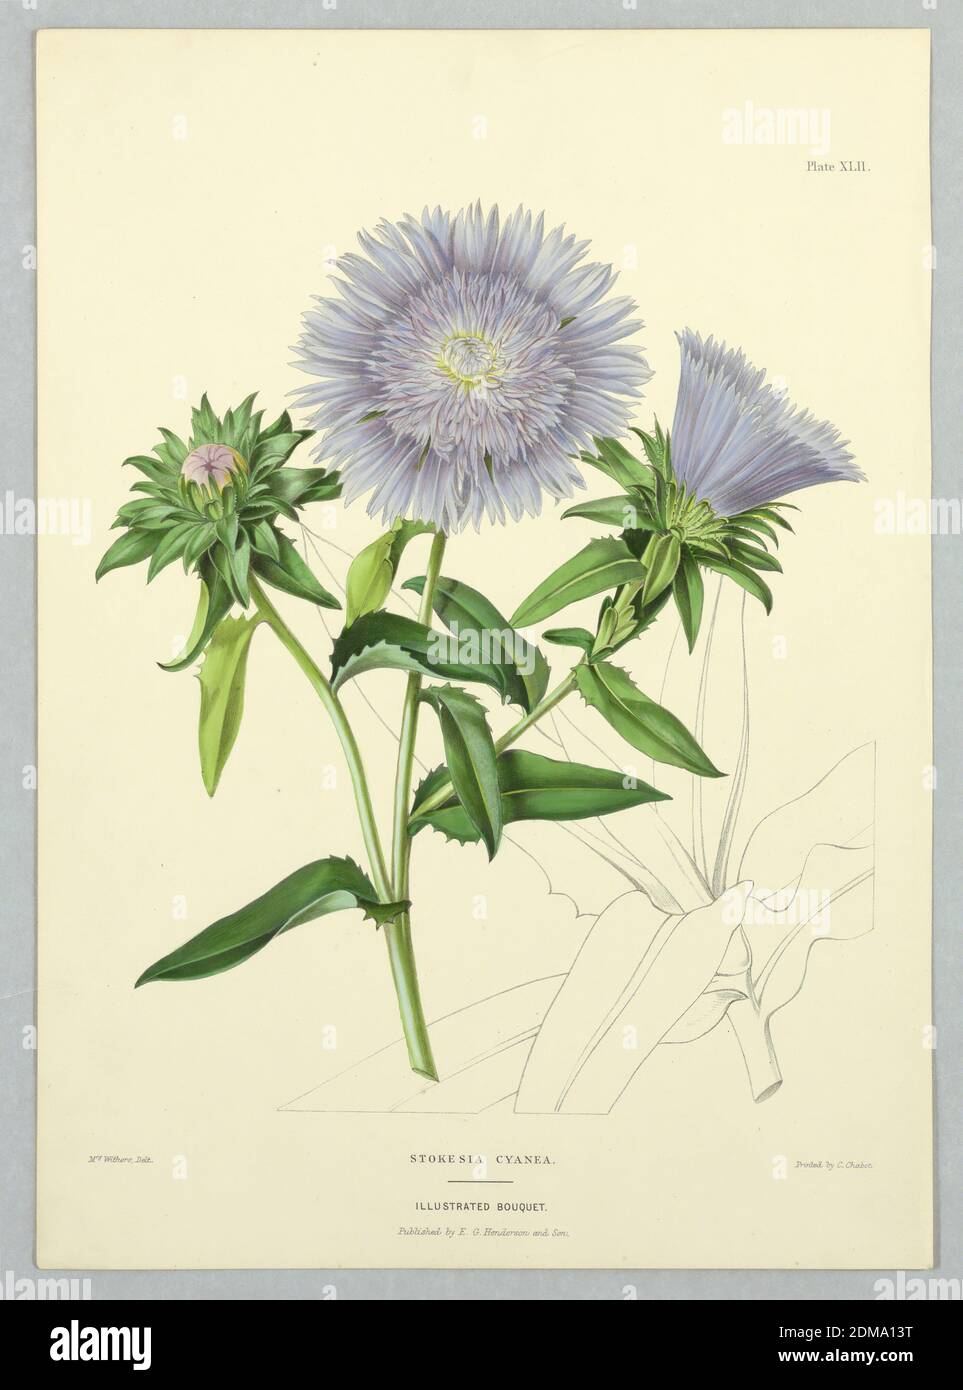 Stokesia Cyanea, Plate XLII from Edward George Henderson's 'The Illustrated Bouquet', Mrs. Withers, English, active 19th c., E. G. Henderson and Son, English, ca. 1859 - 1886, Chromolithograph on paper, Stokesia Cyanea, Plate XLII from Edward George Henderson's 'The Illustrated Bouquet.', London, England, ca. 1857–1864, Print Stock Photo